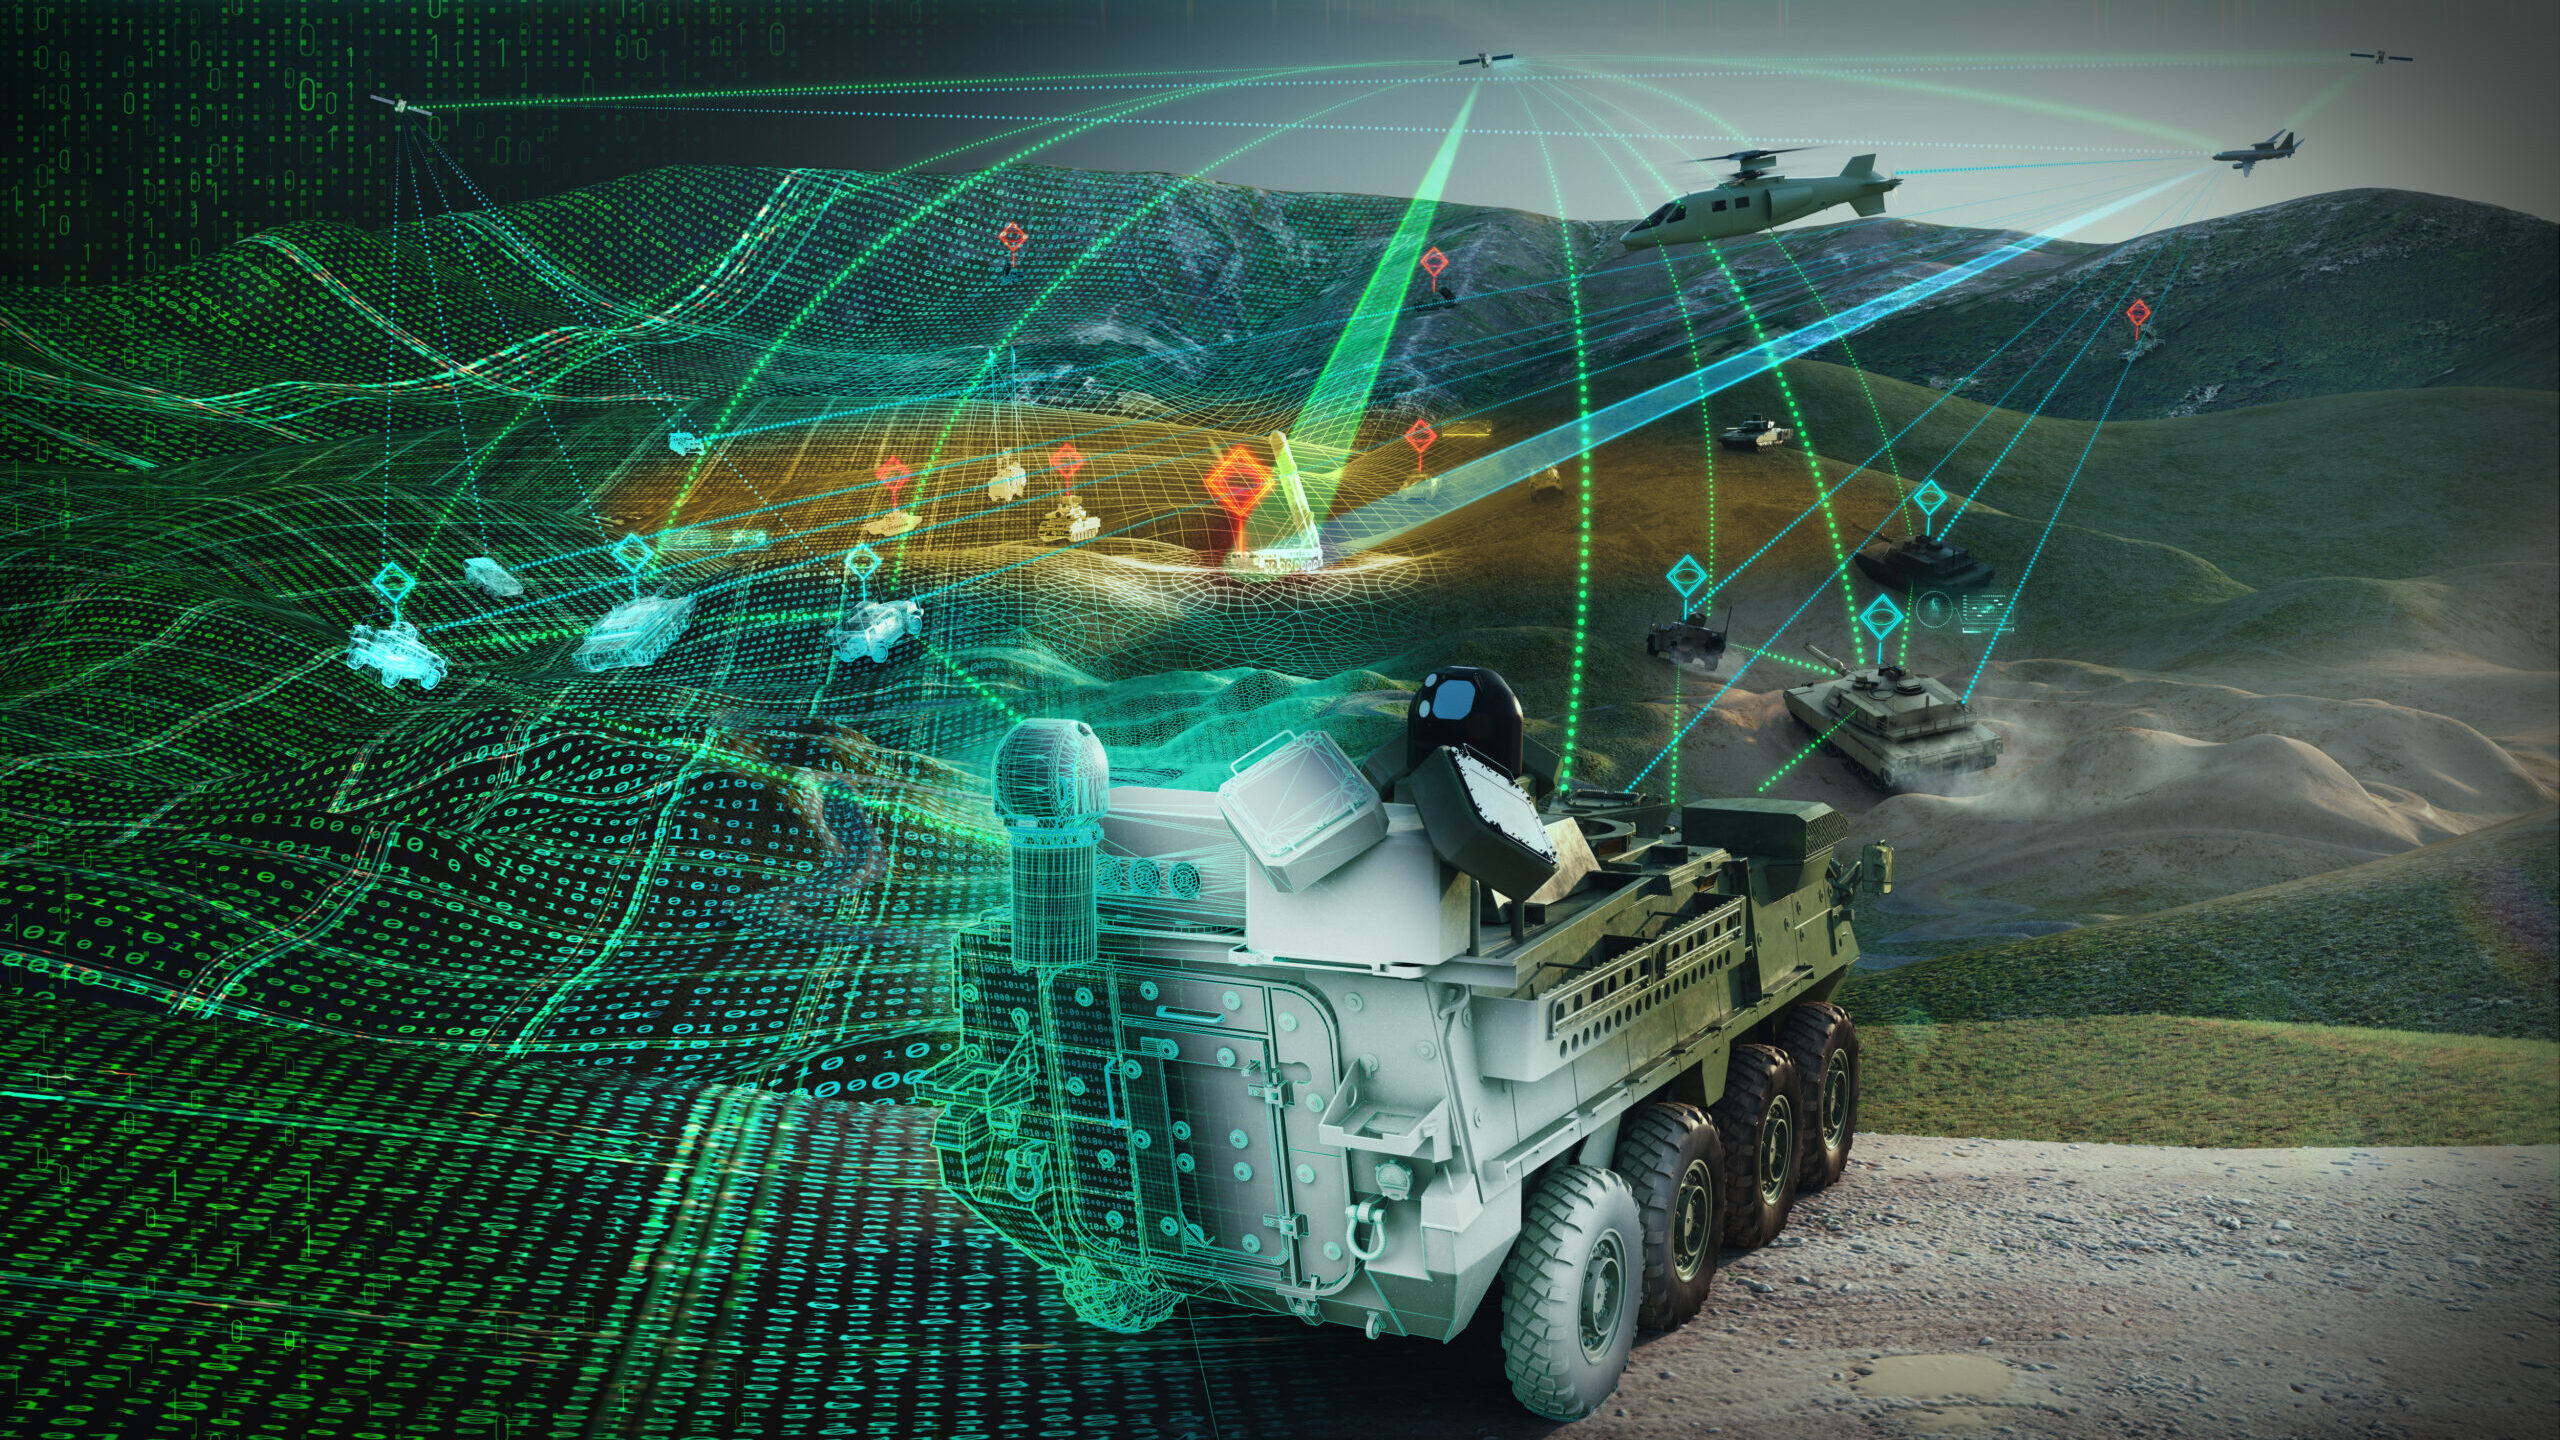 JADC2 Digital Transformation as envisioned by Raytheon Intelligence & Space.